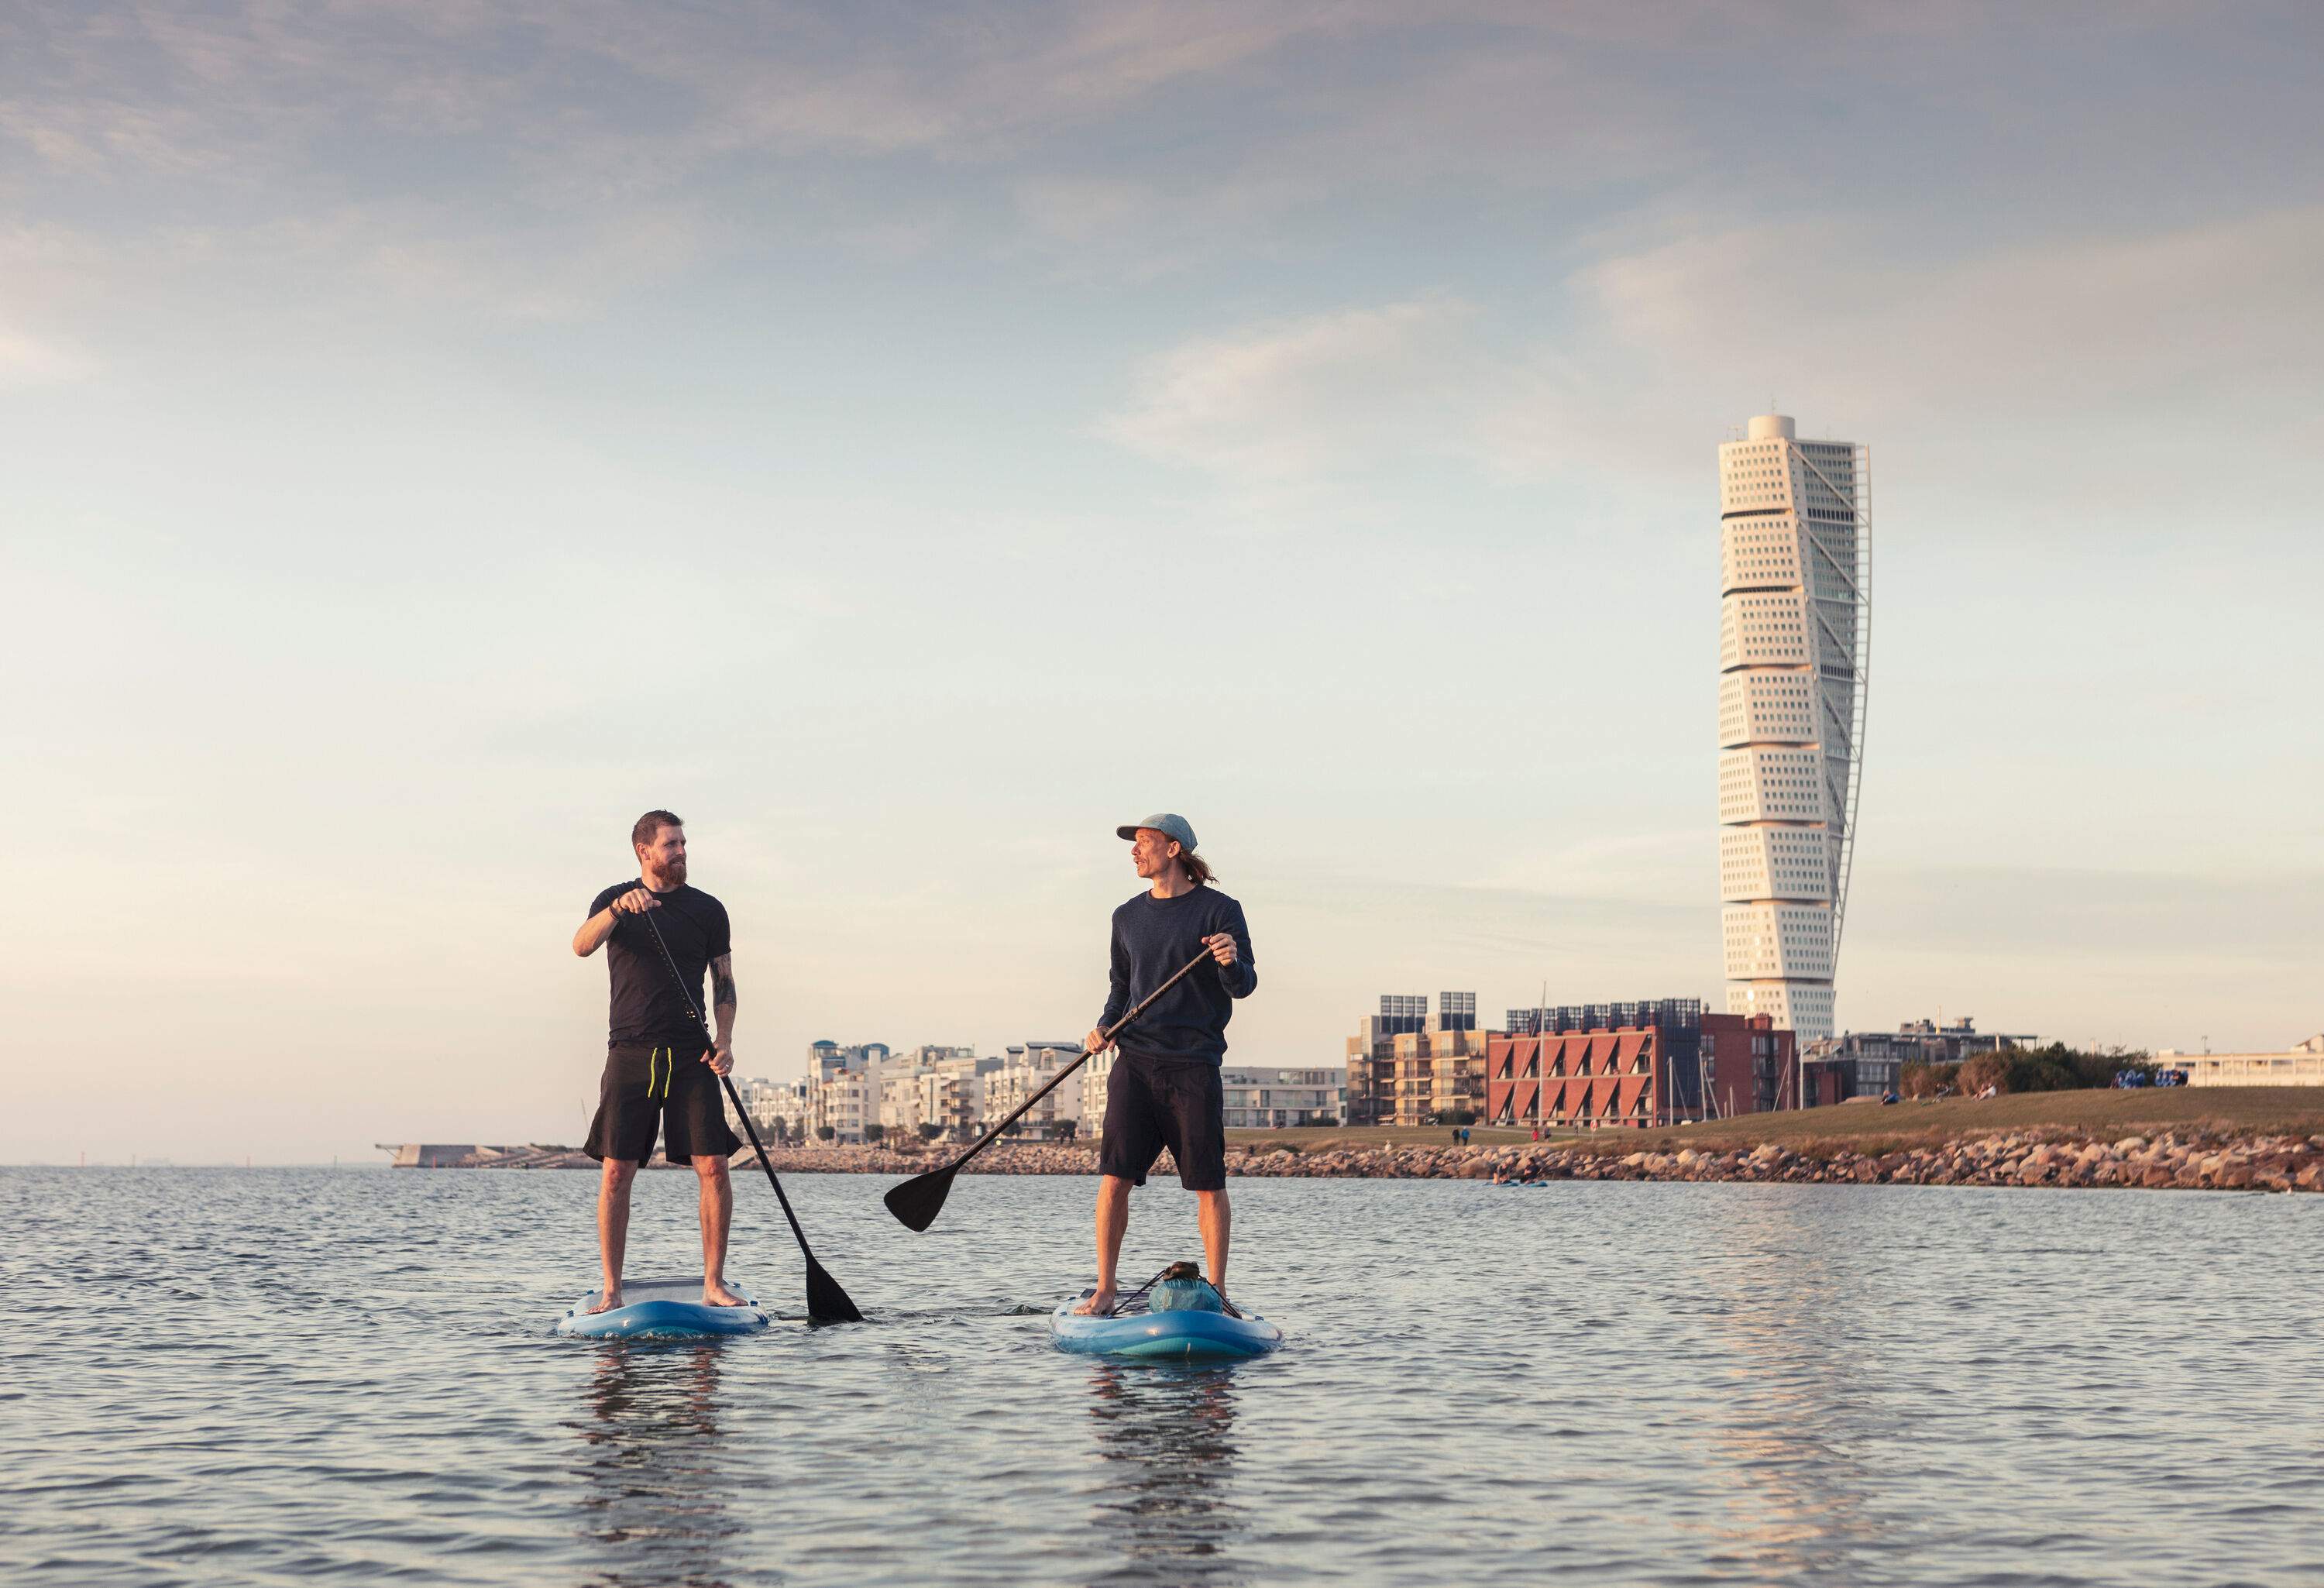 Two men stand on floating boards and paddle themselves to propel through the water while talking to each other with an iconic skyscraper in the background.